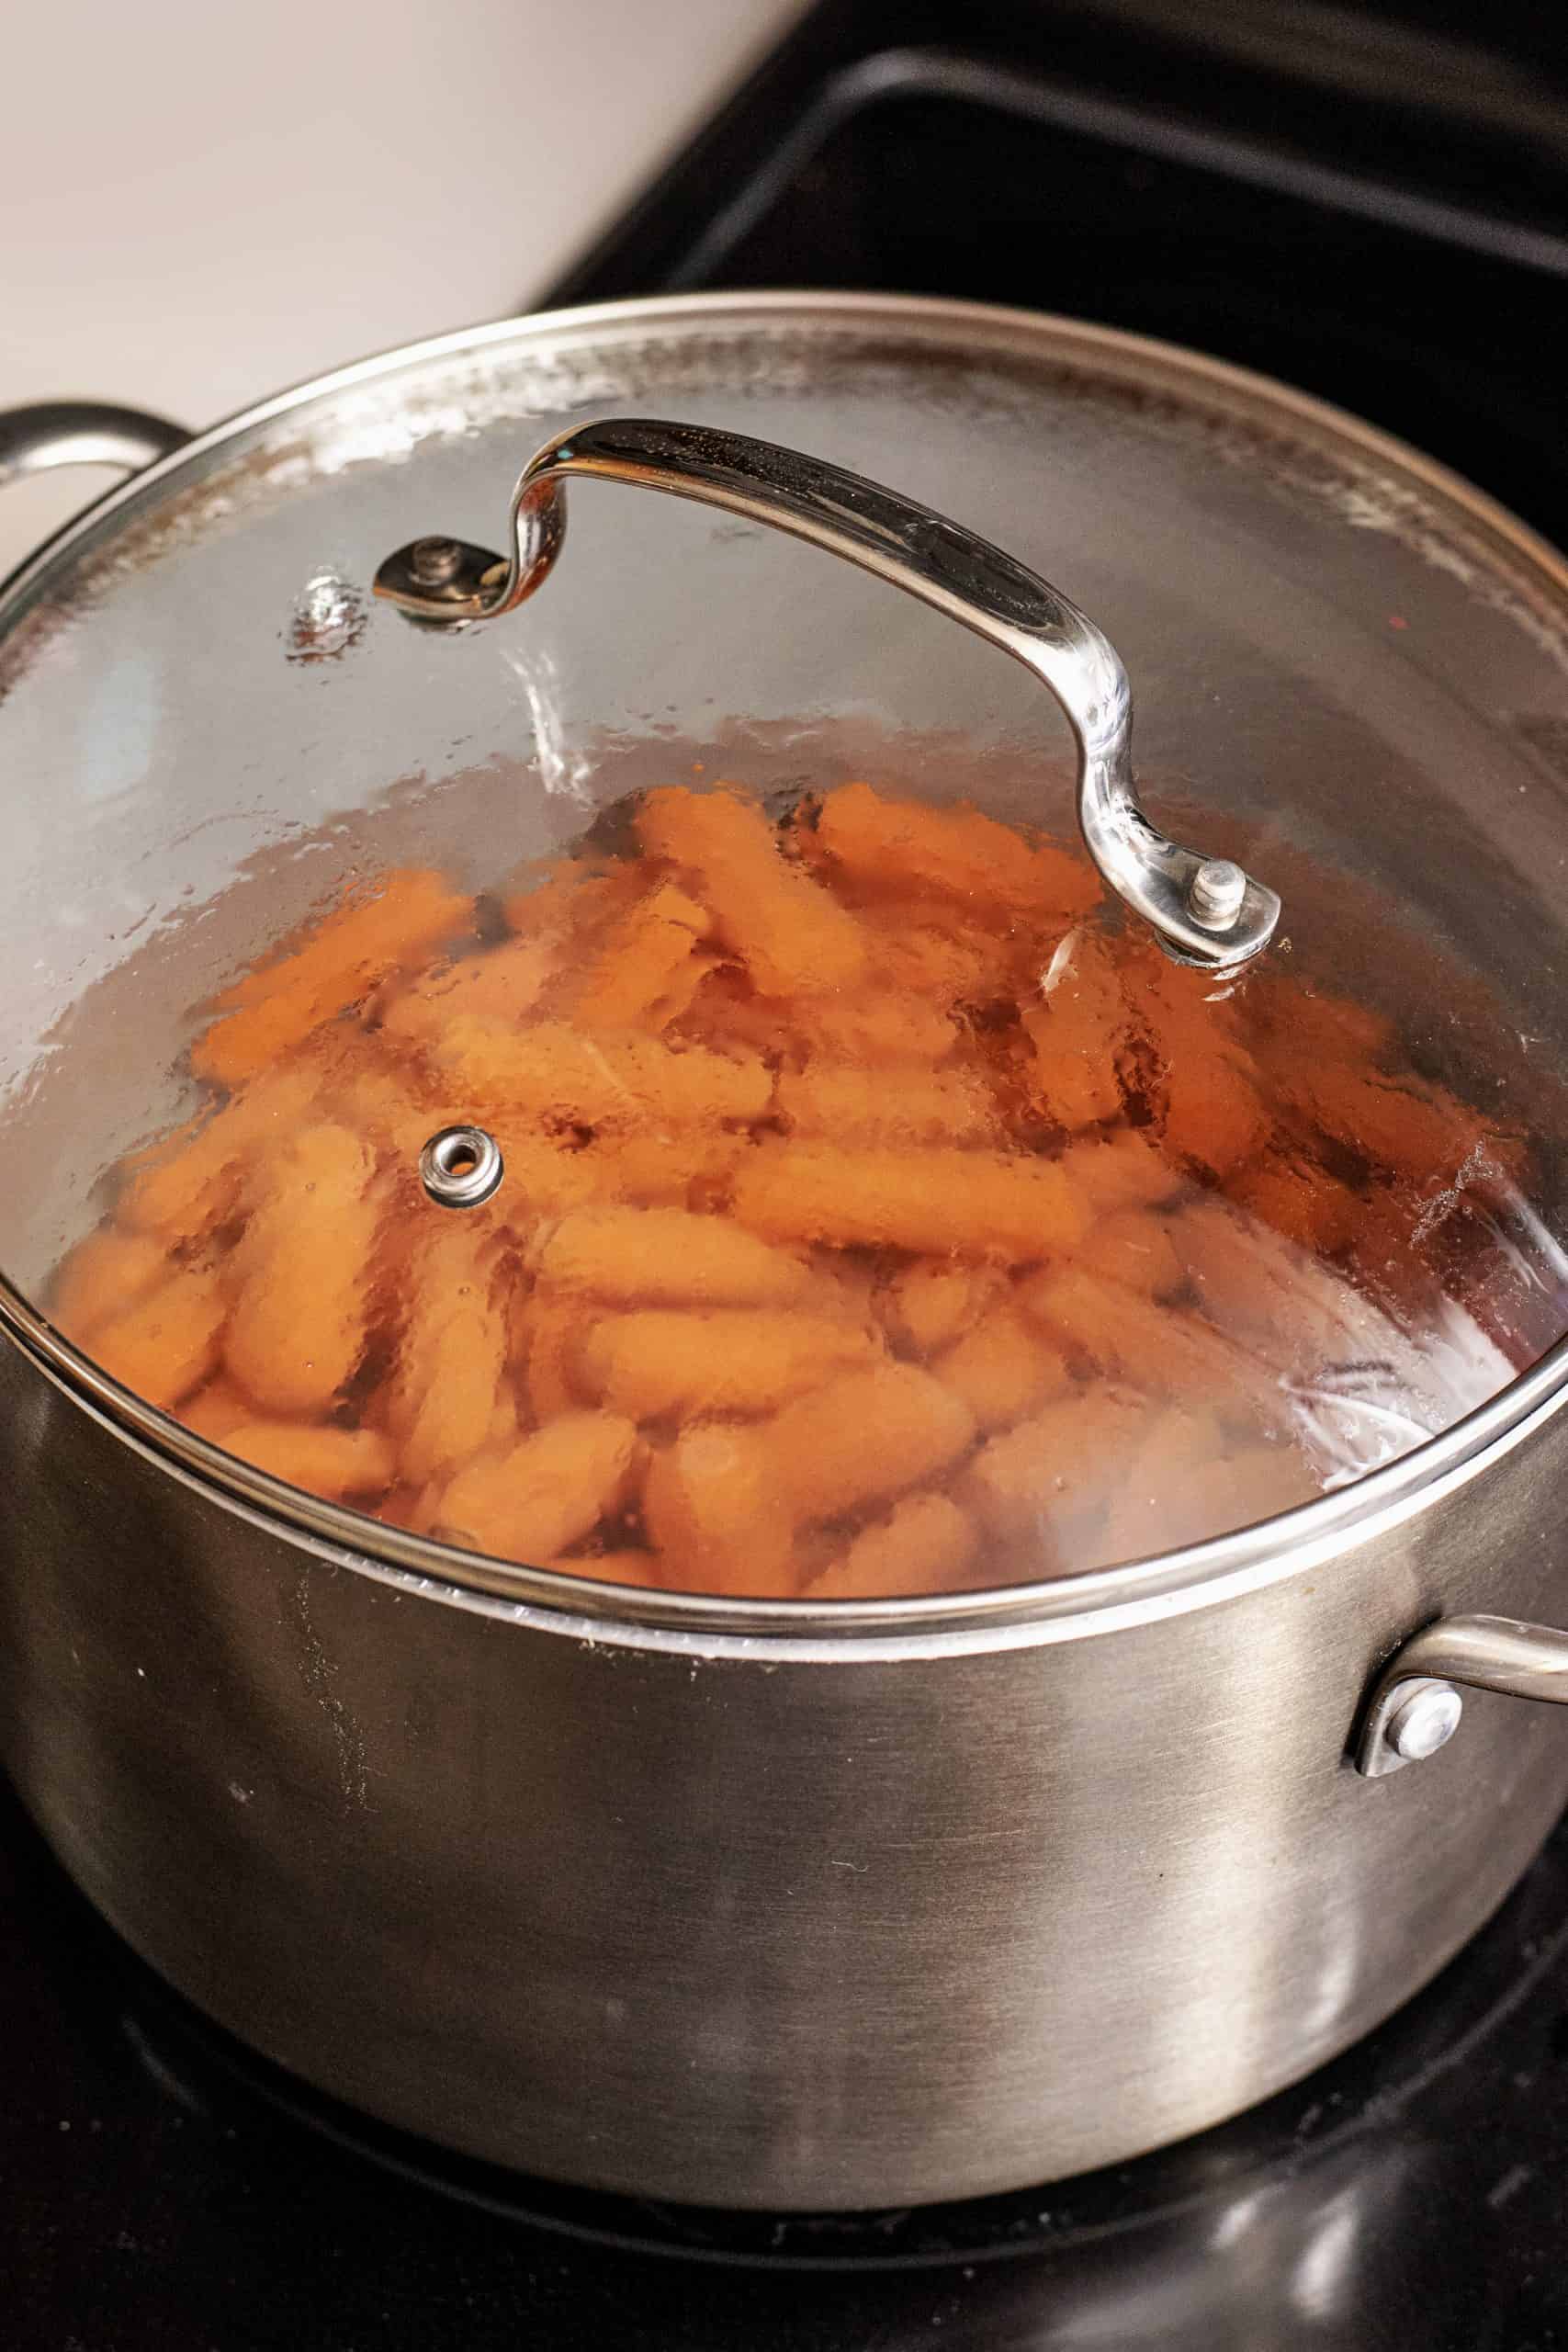 Place baby carrots in water